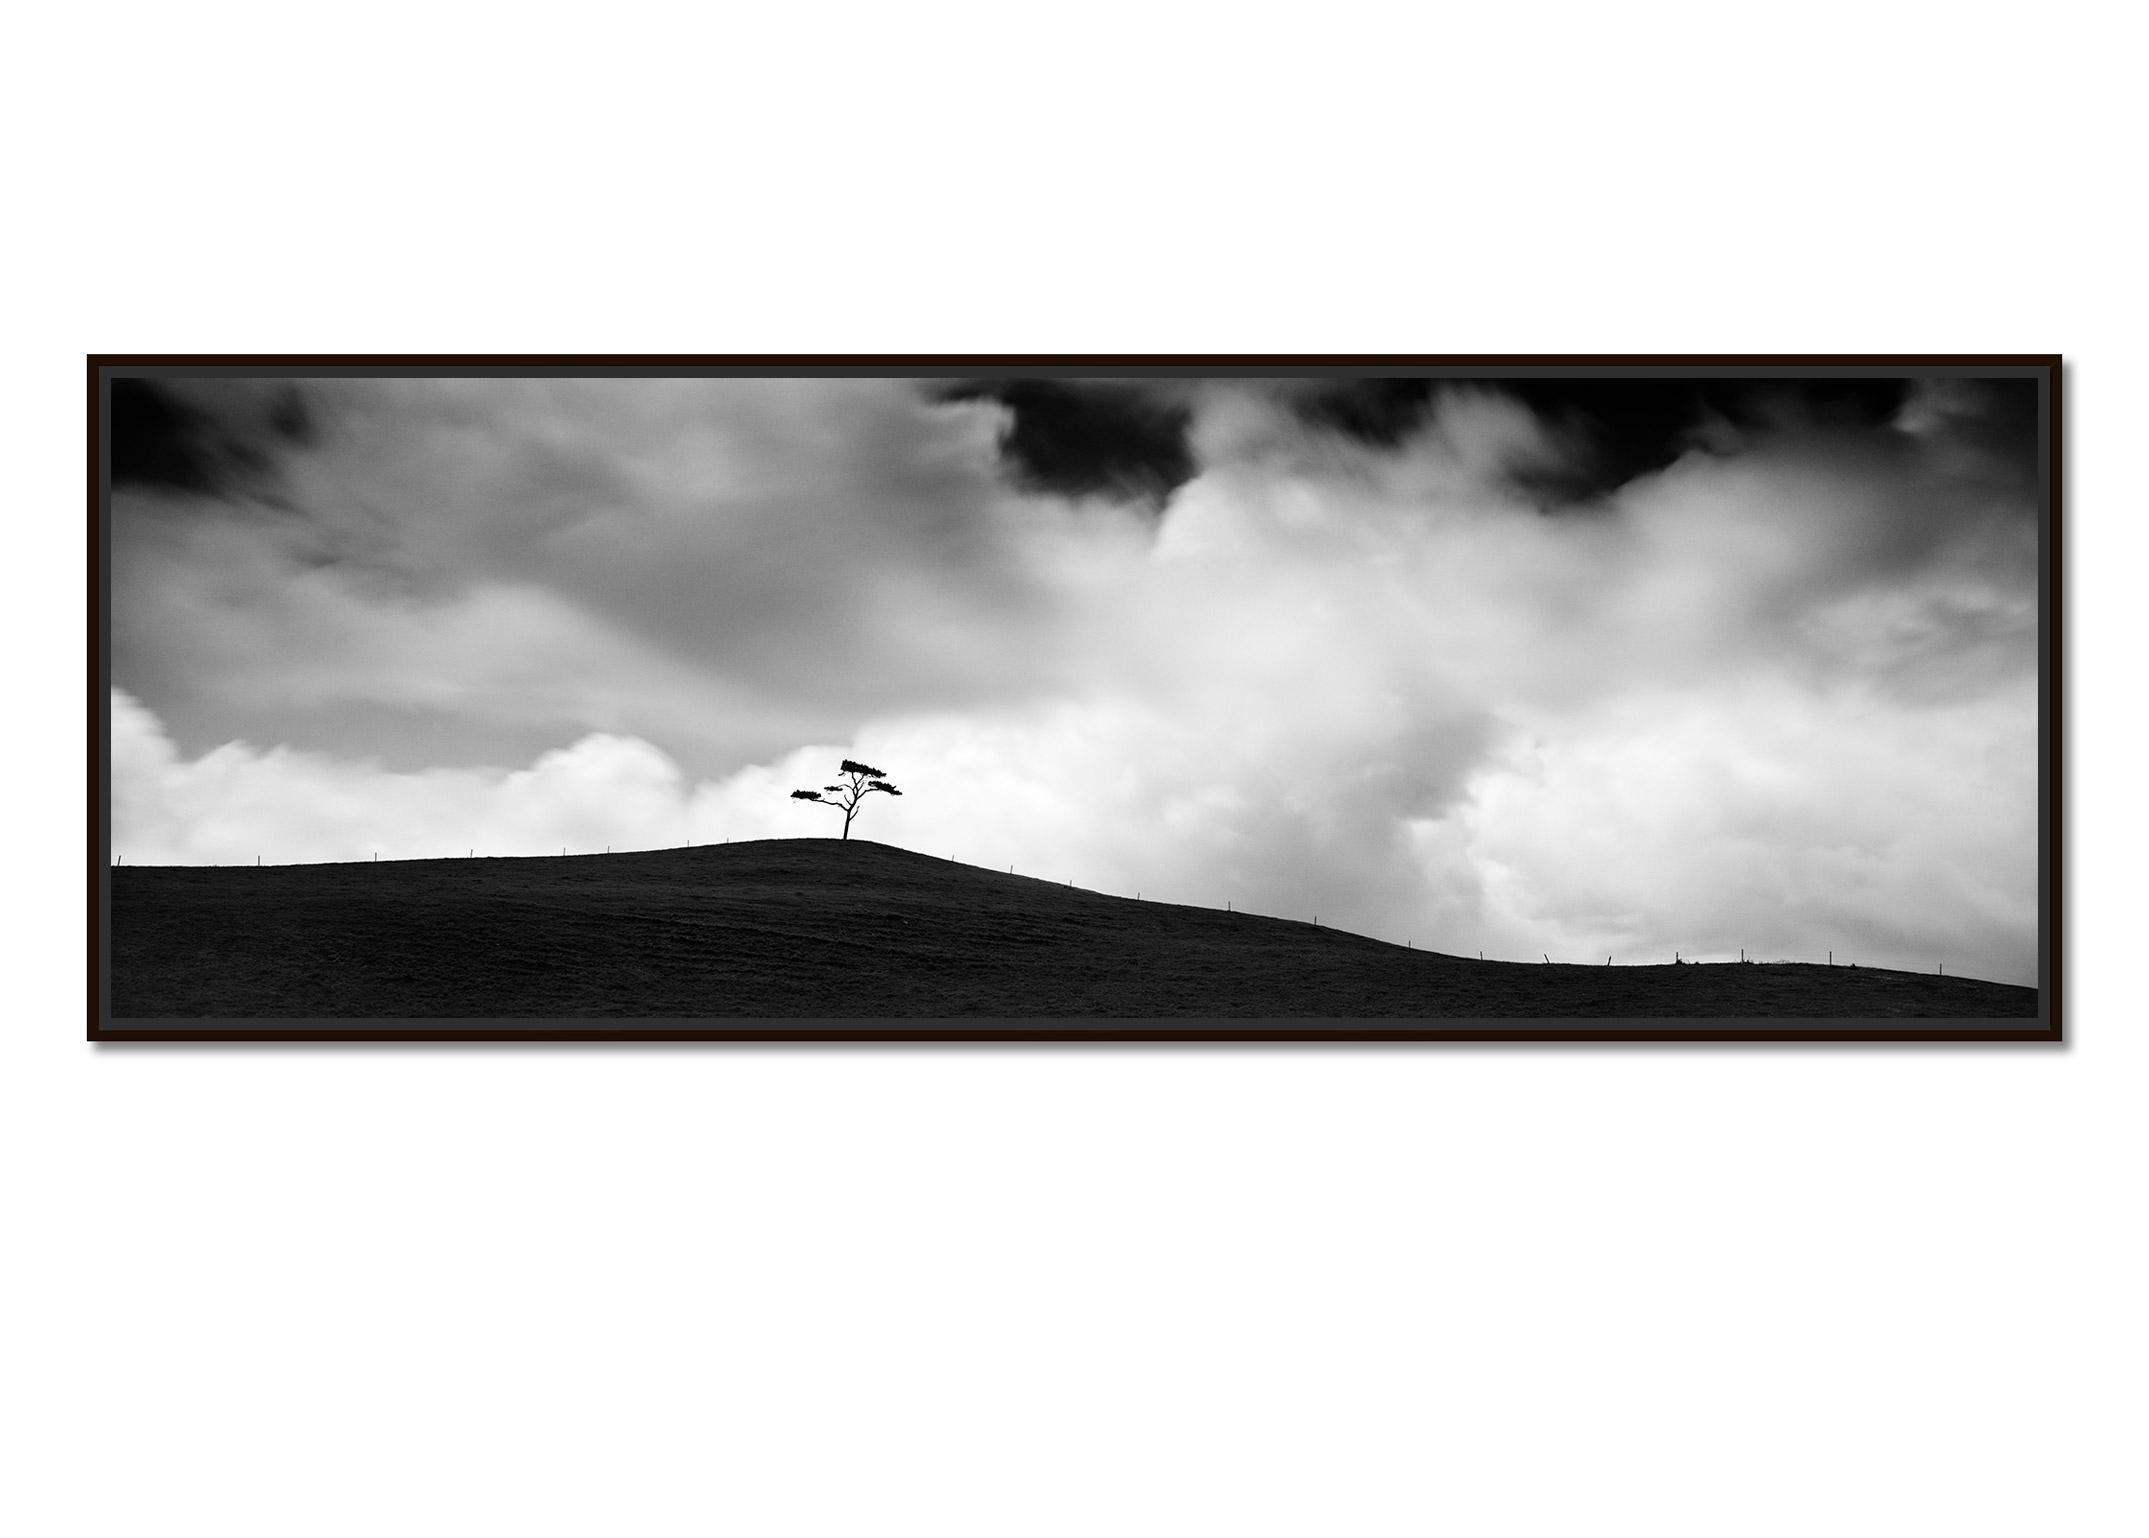 Cypress Hill Panorama, single Tee, black and white photography, art landscape - Photograph by Gerald Berghammer